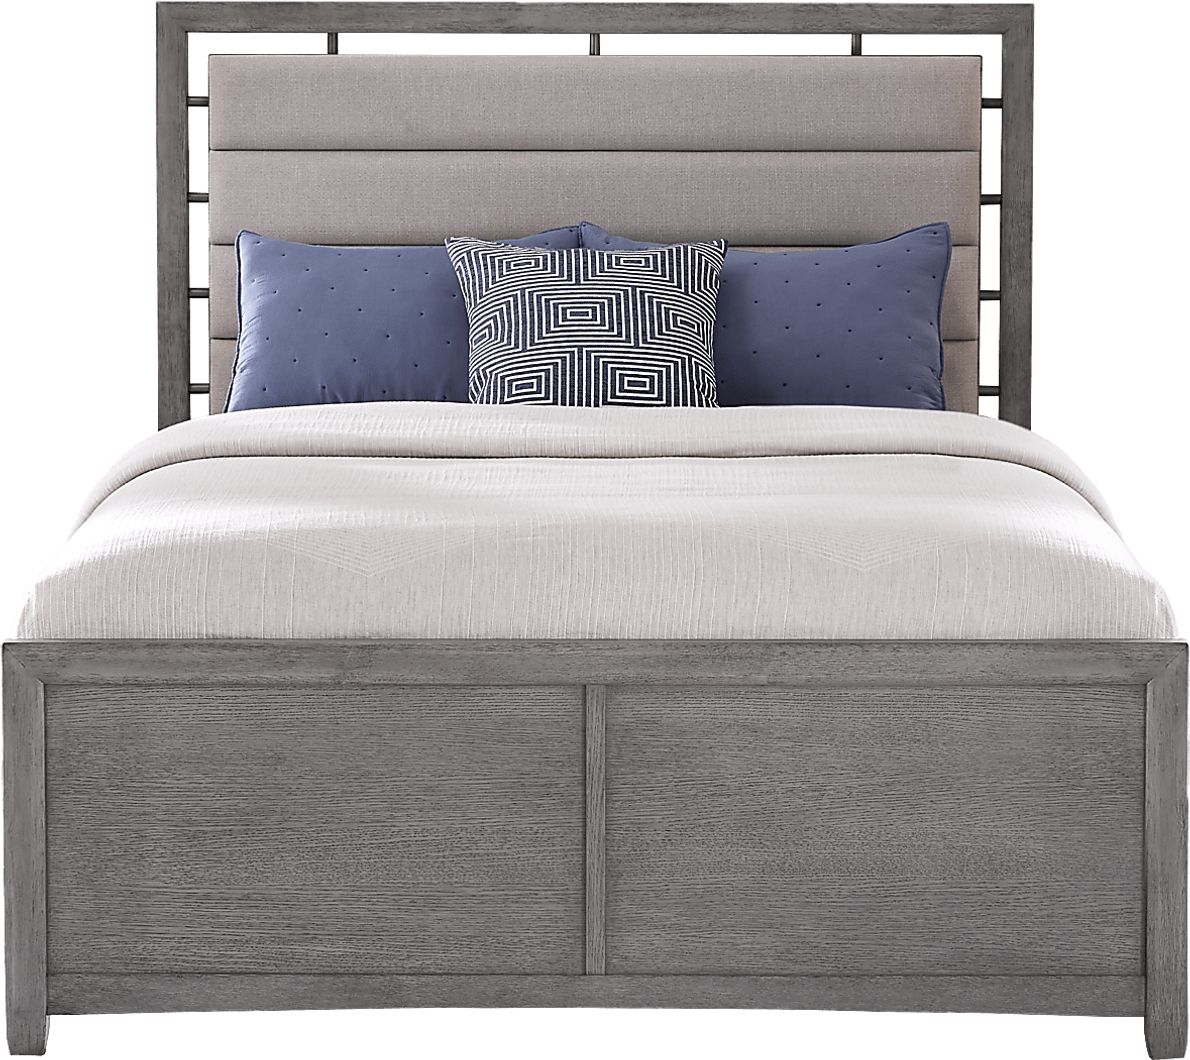 Broadmore Light Gray 3 Pc King Upholstered Bed